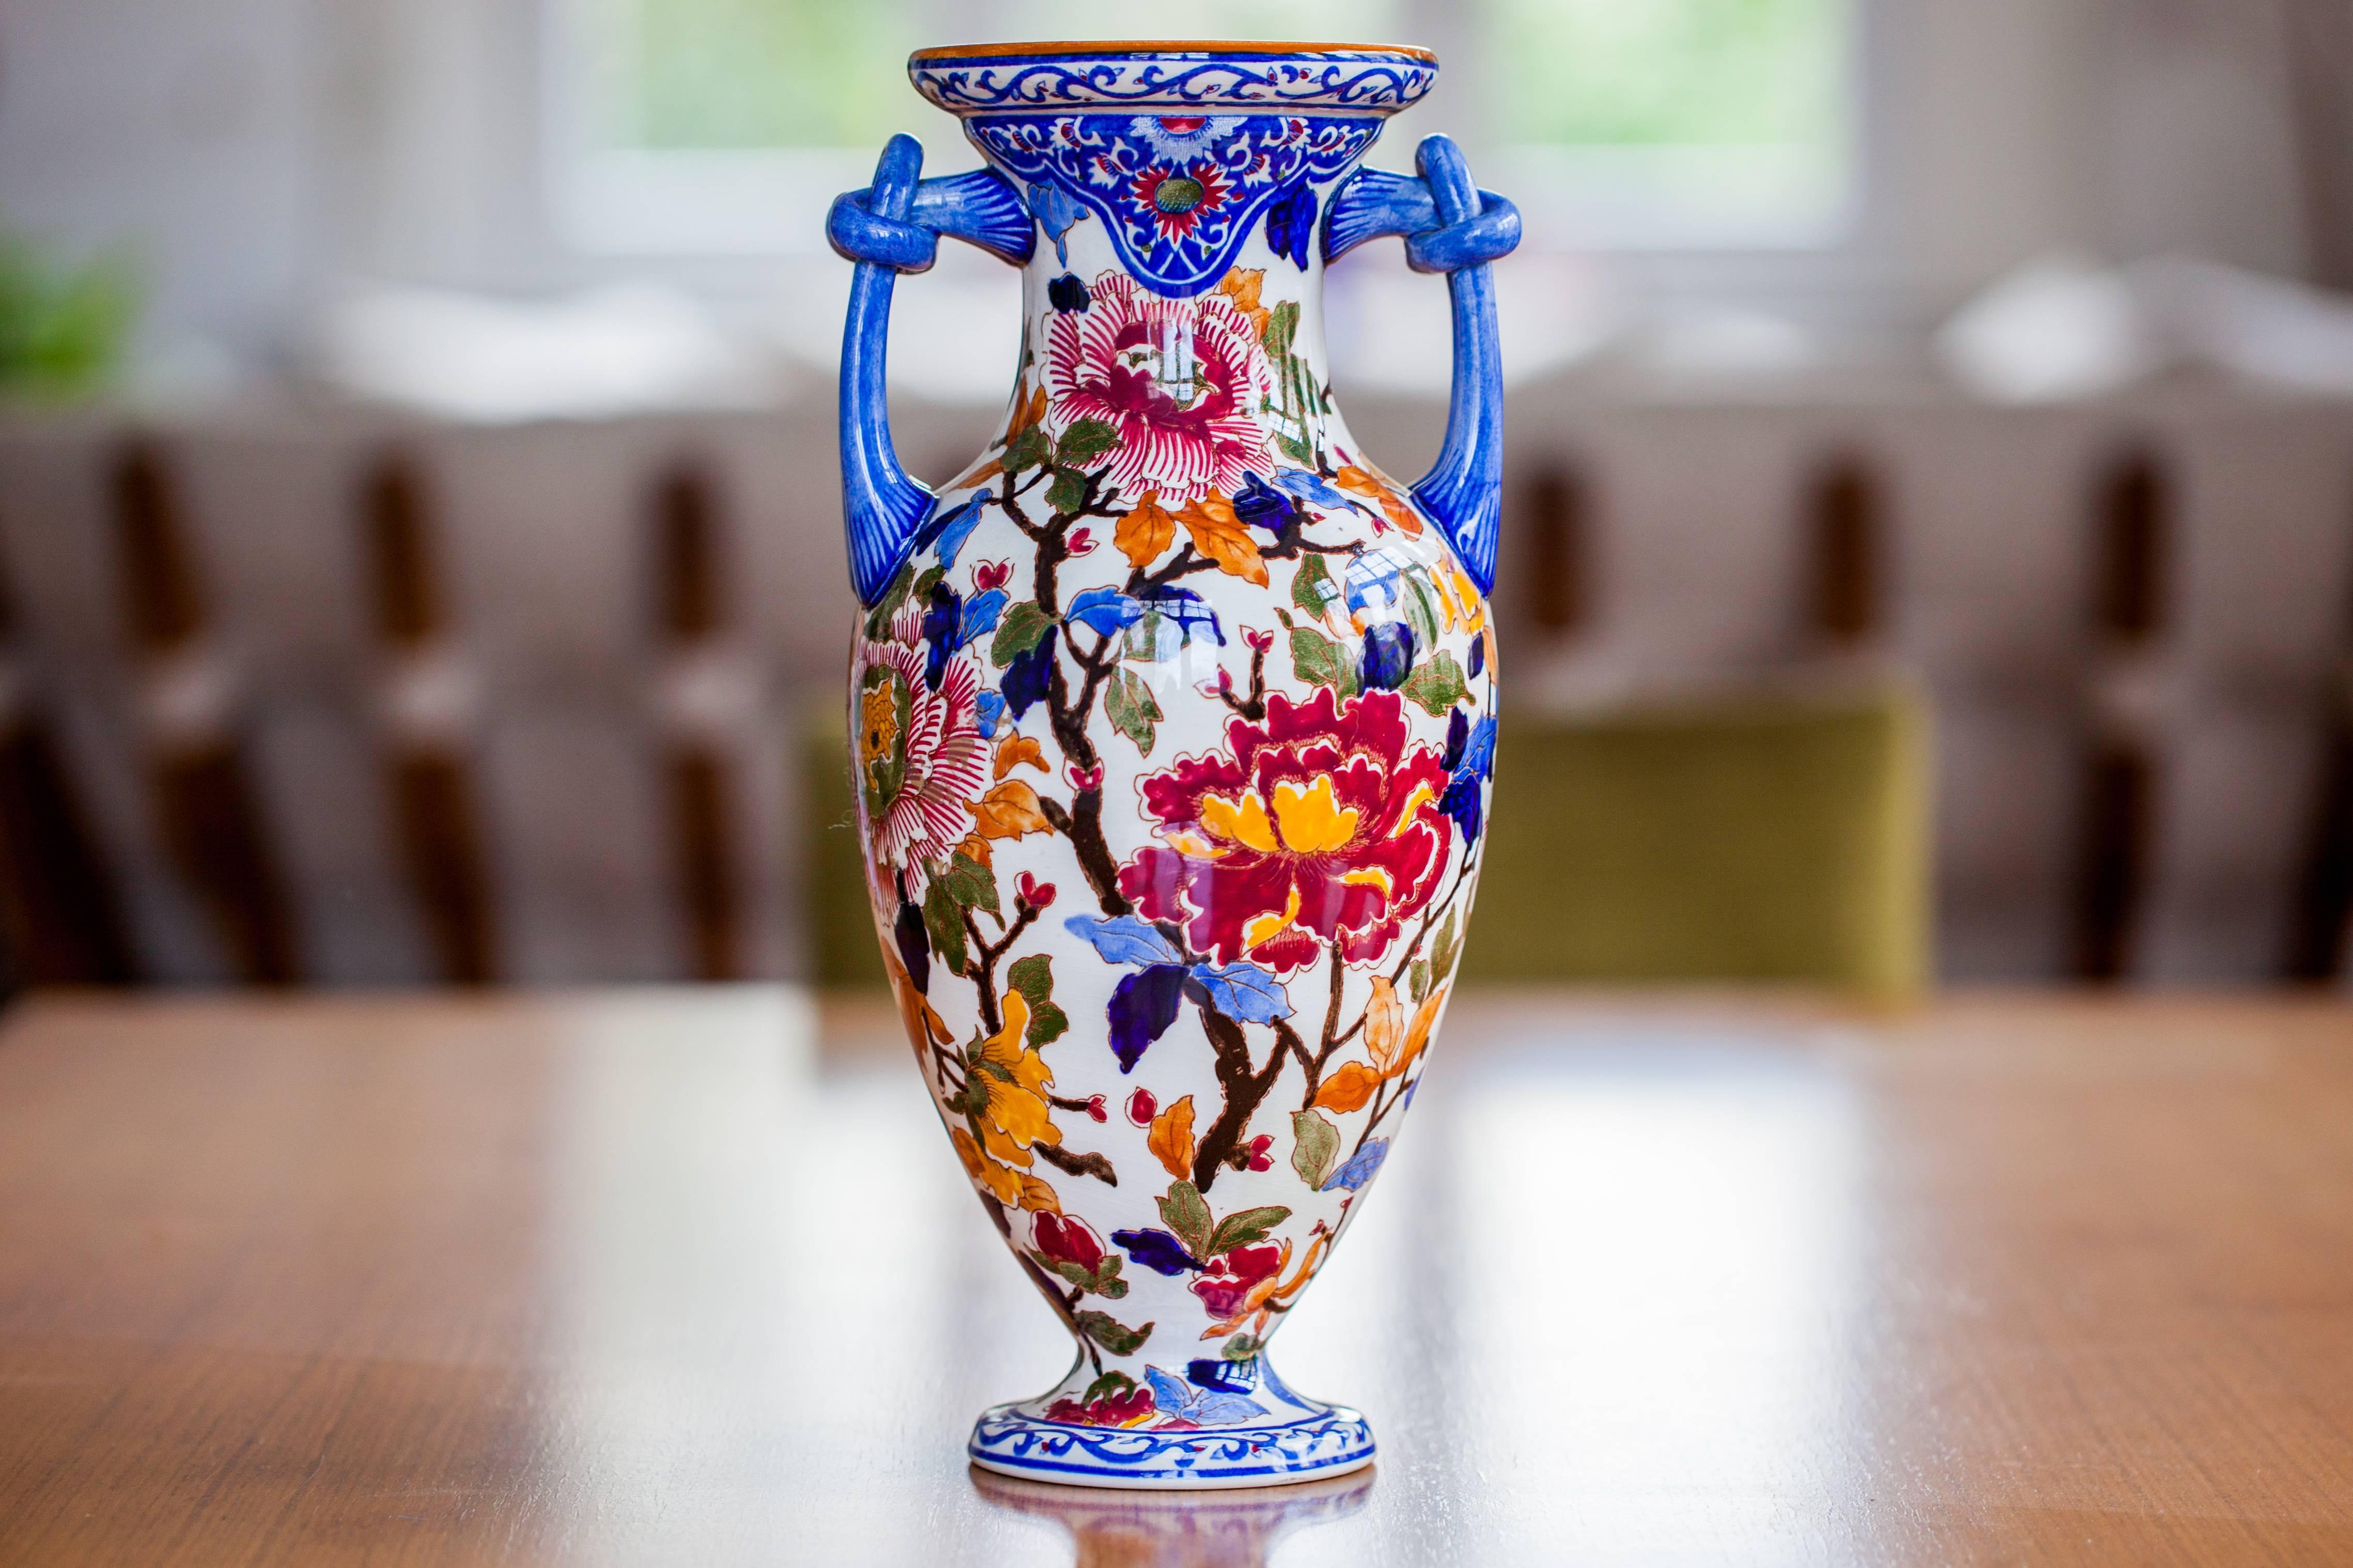 Large old Gien faience vase with multicolored floral decoration on a white background.
It is baluster shaped, amphora, two blue handles in the shape of a sliding knot, 